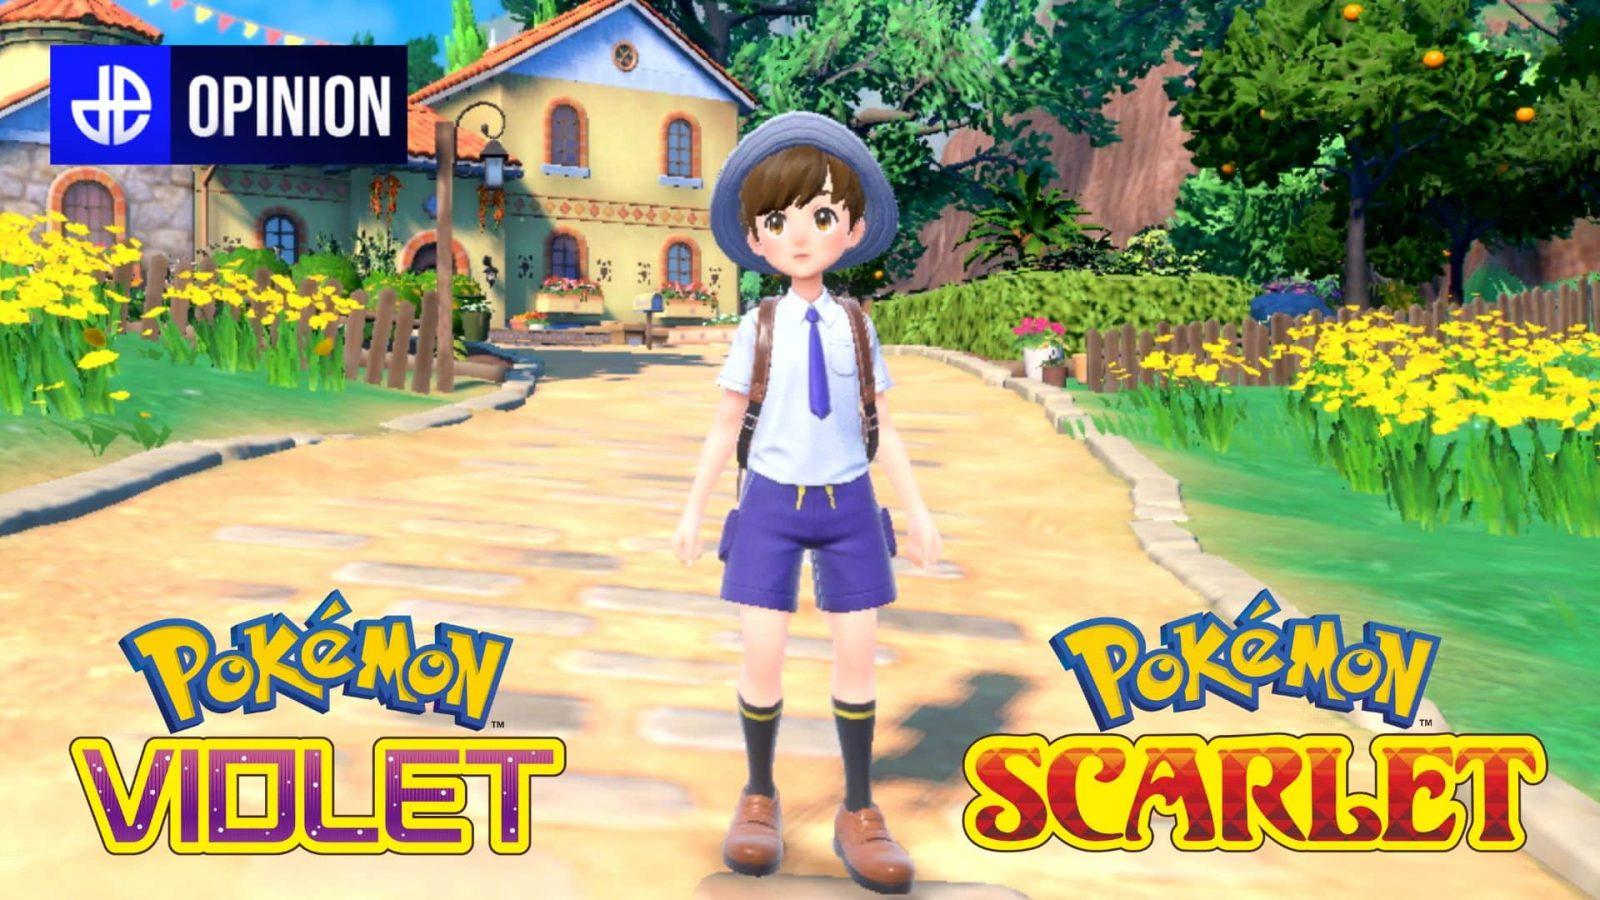 Pokémon's Most Immersive World Feature Could Upgrade Scarlet & Violet